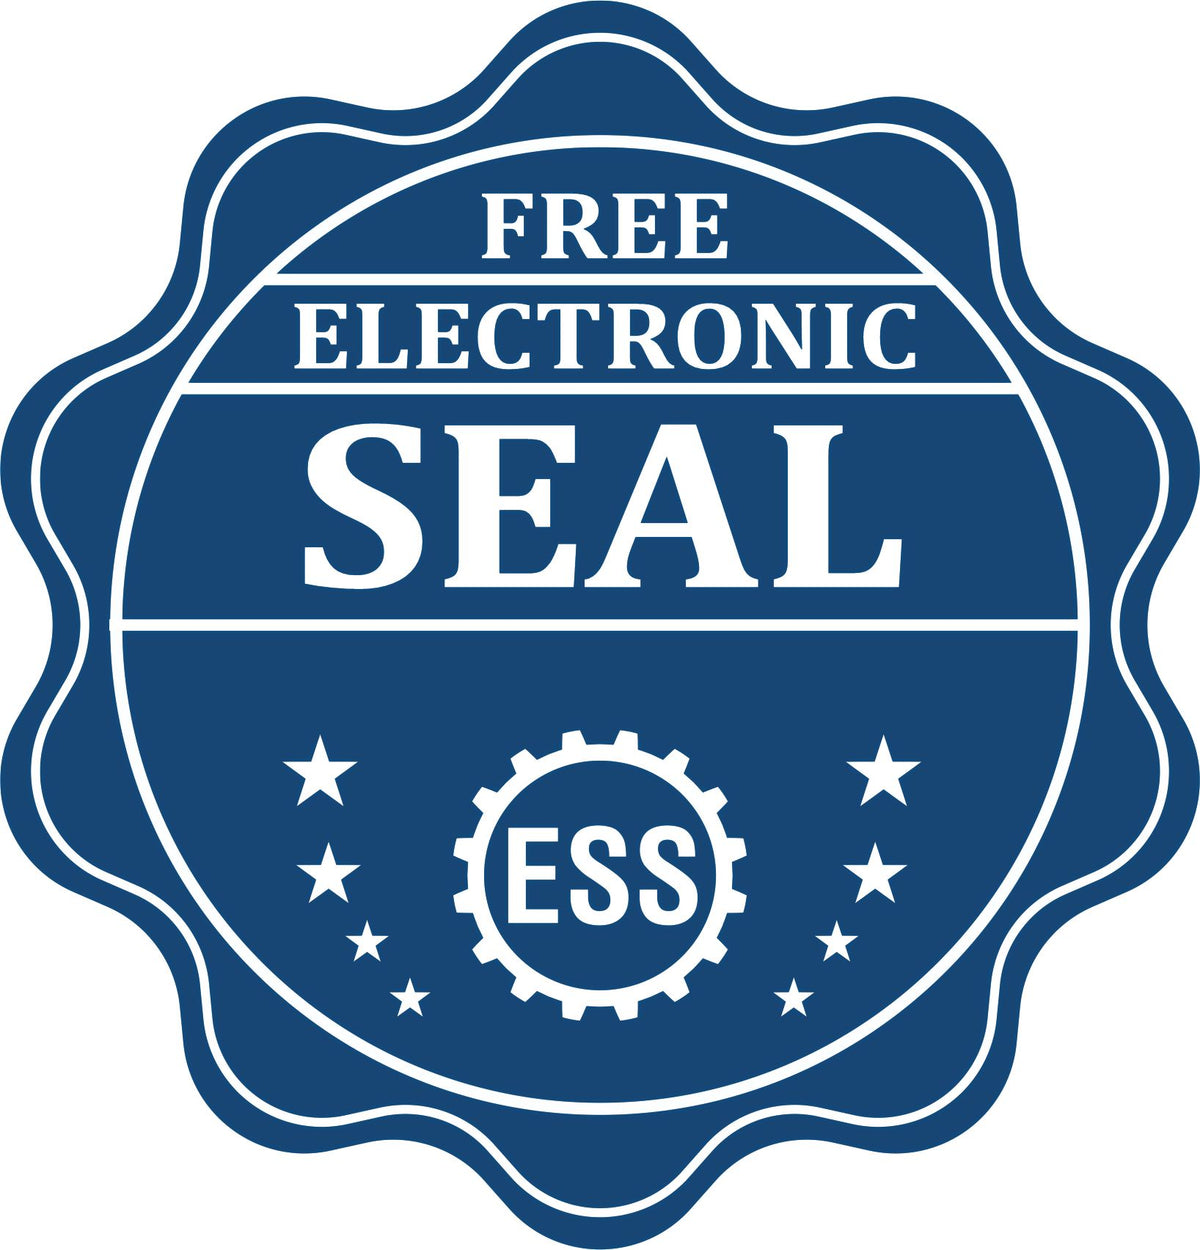 A badge showing a free electronic seal for the Gift Tennessee Land Surveyor Seal with stars and the ESS gear on the emblem.